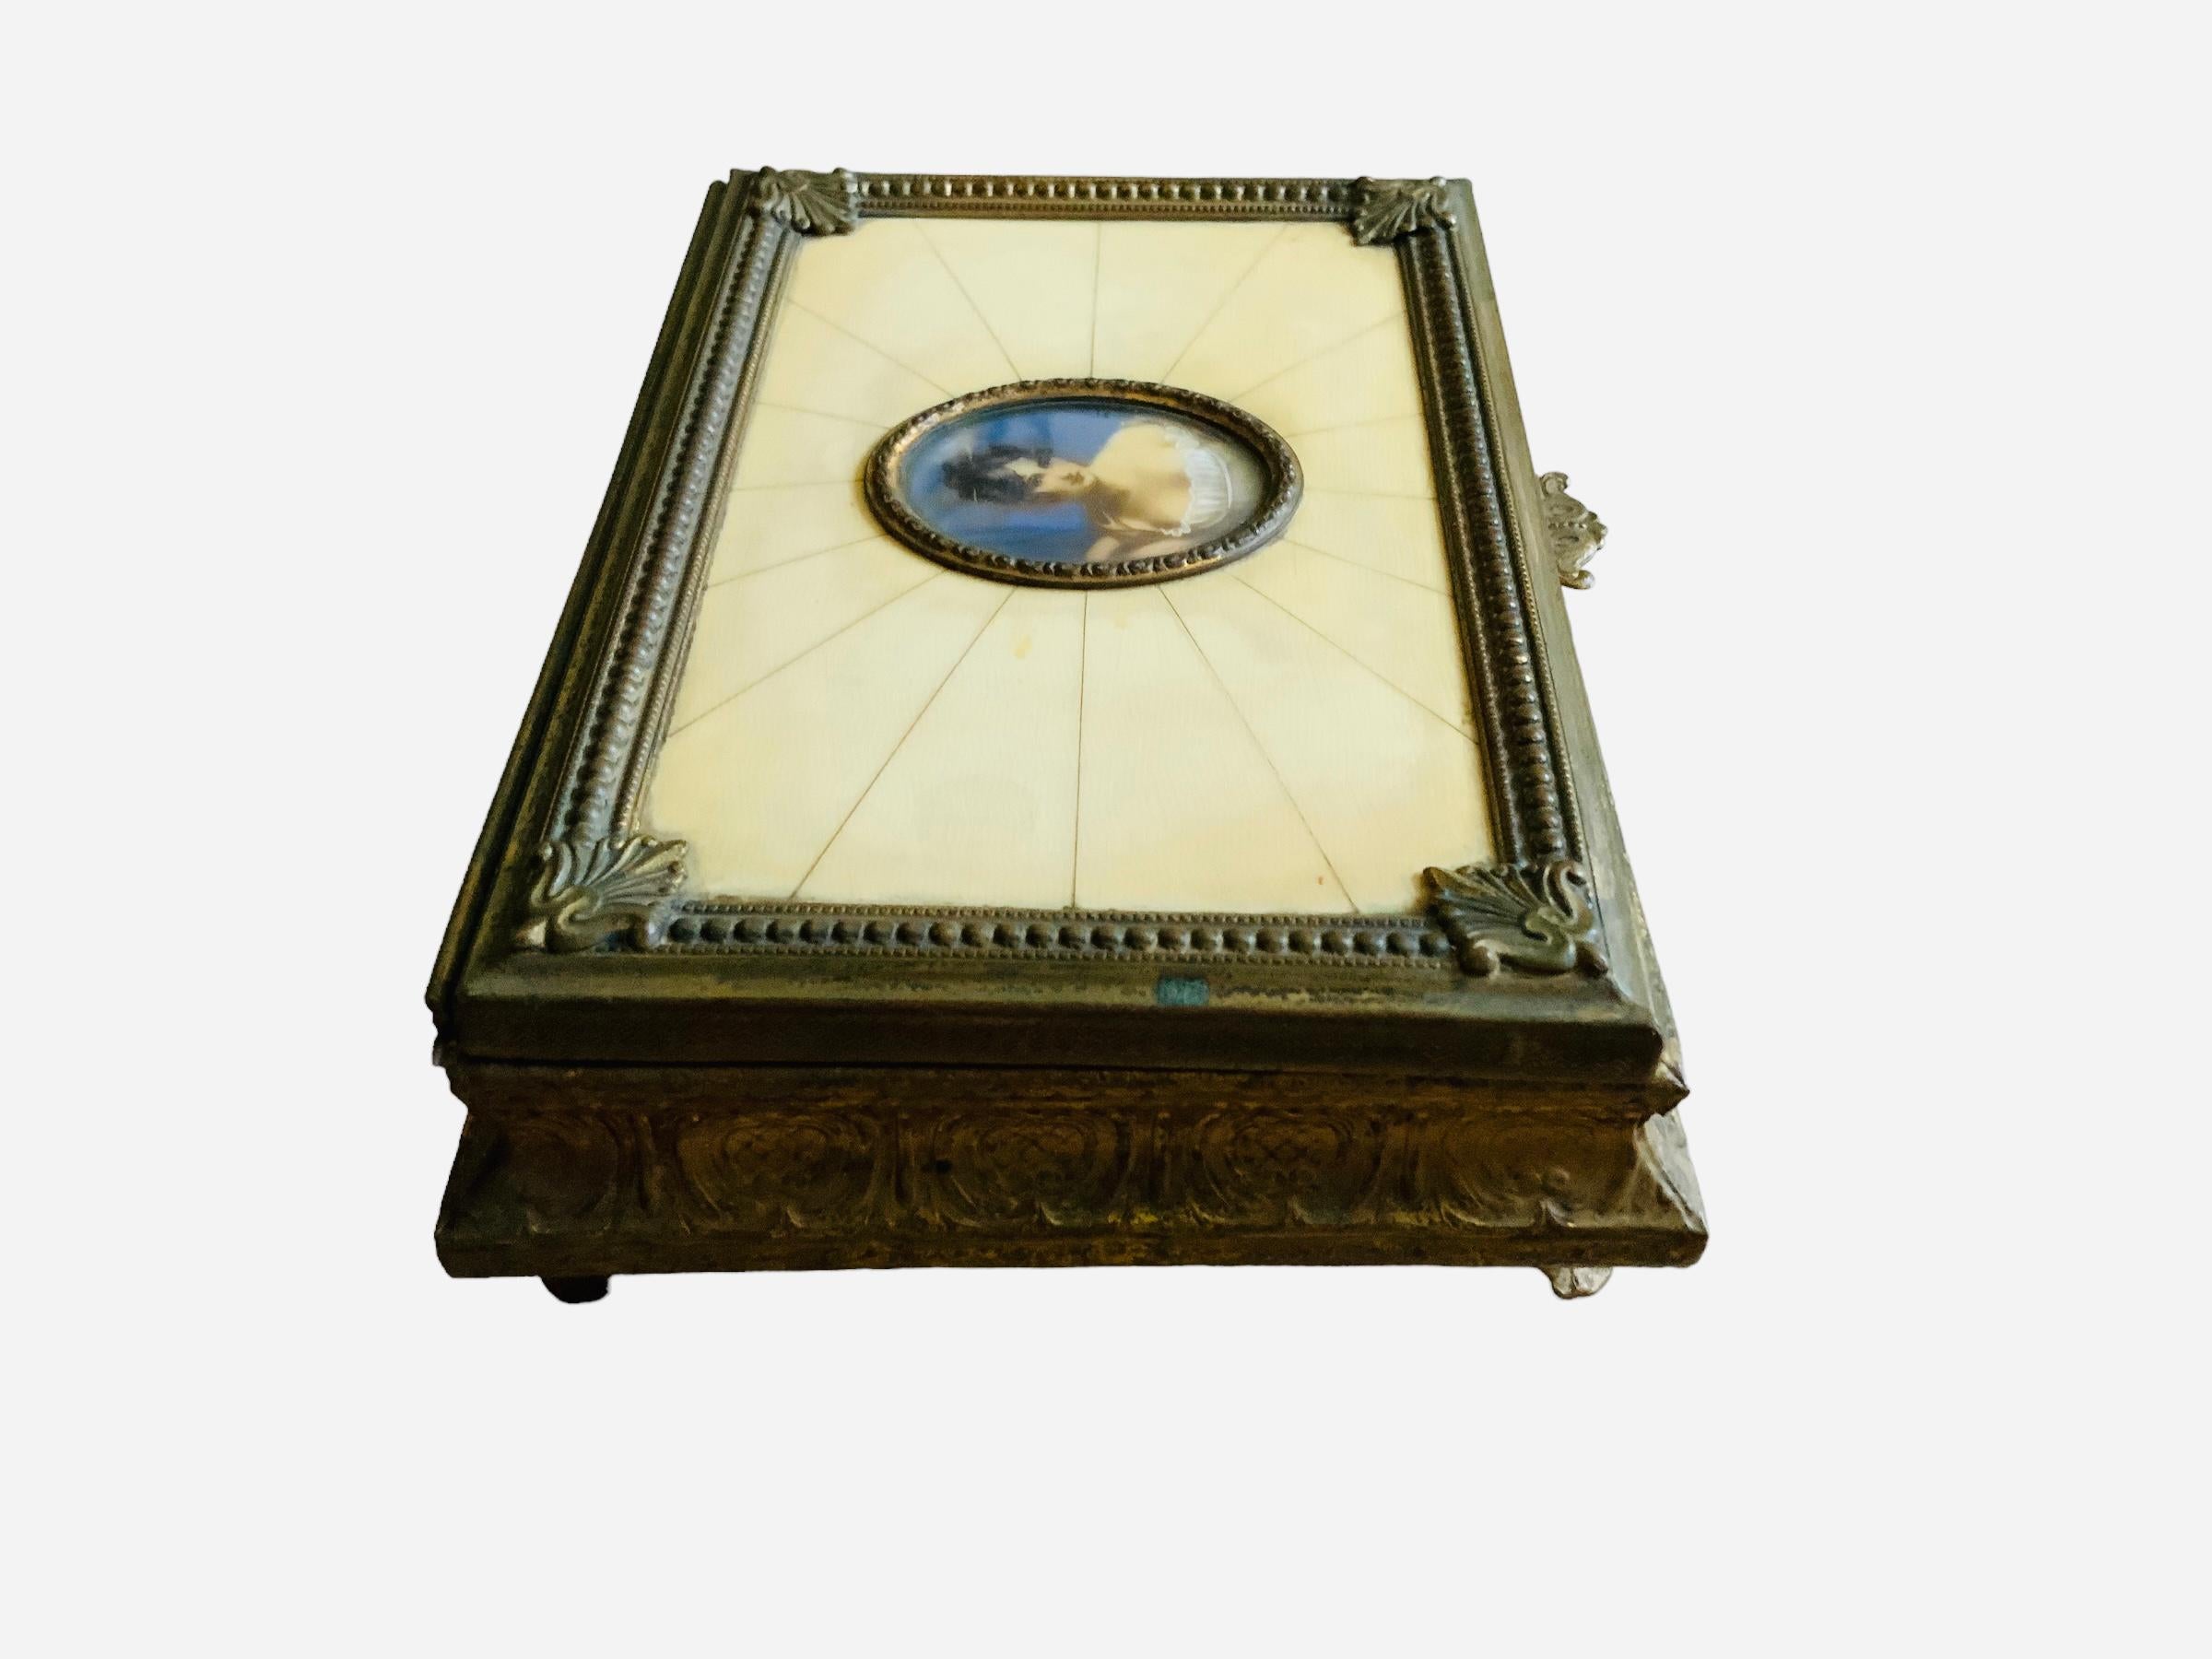 This is an Italian bronzed metal square hinged lidded music box. It depicts a lid decorated in the center with a 19th century hand painted portrait of Madame Recamier adorned with a patinated metal oval frame. A faux ivory panel around enhances it.